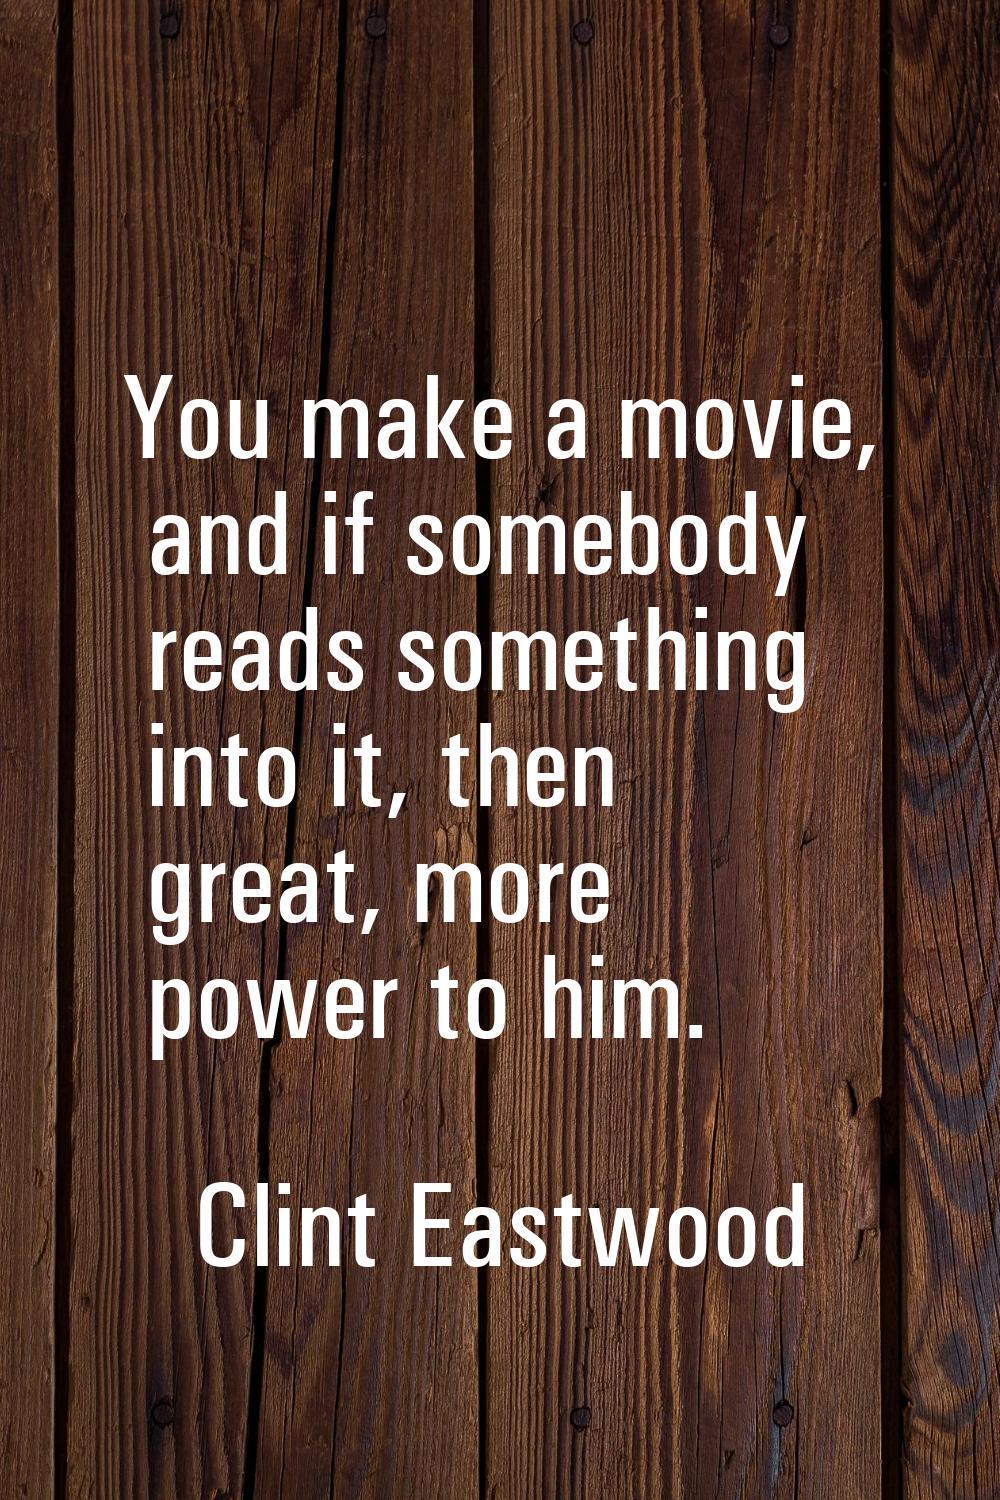 You make a movie, and if somebody reads something into it, then great, more power to him.